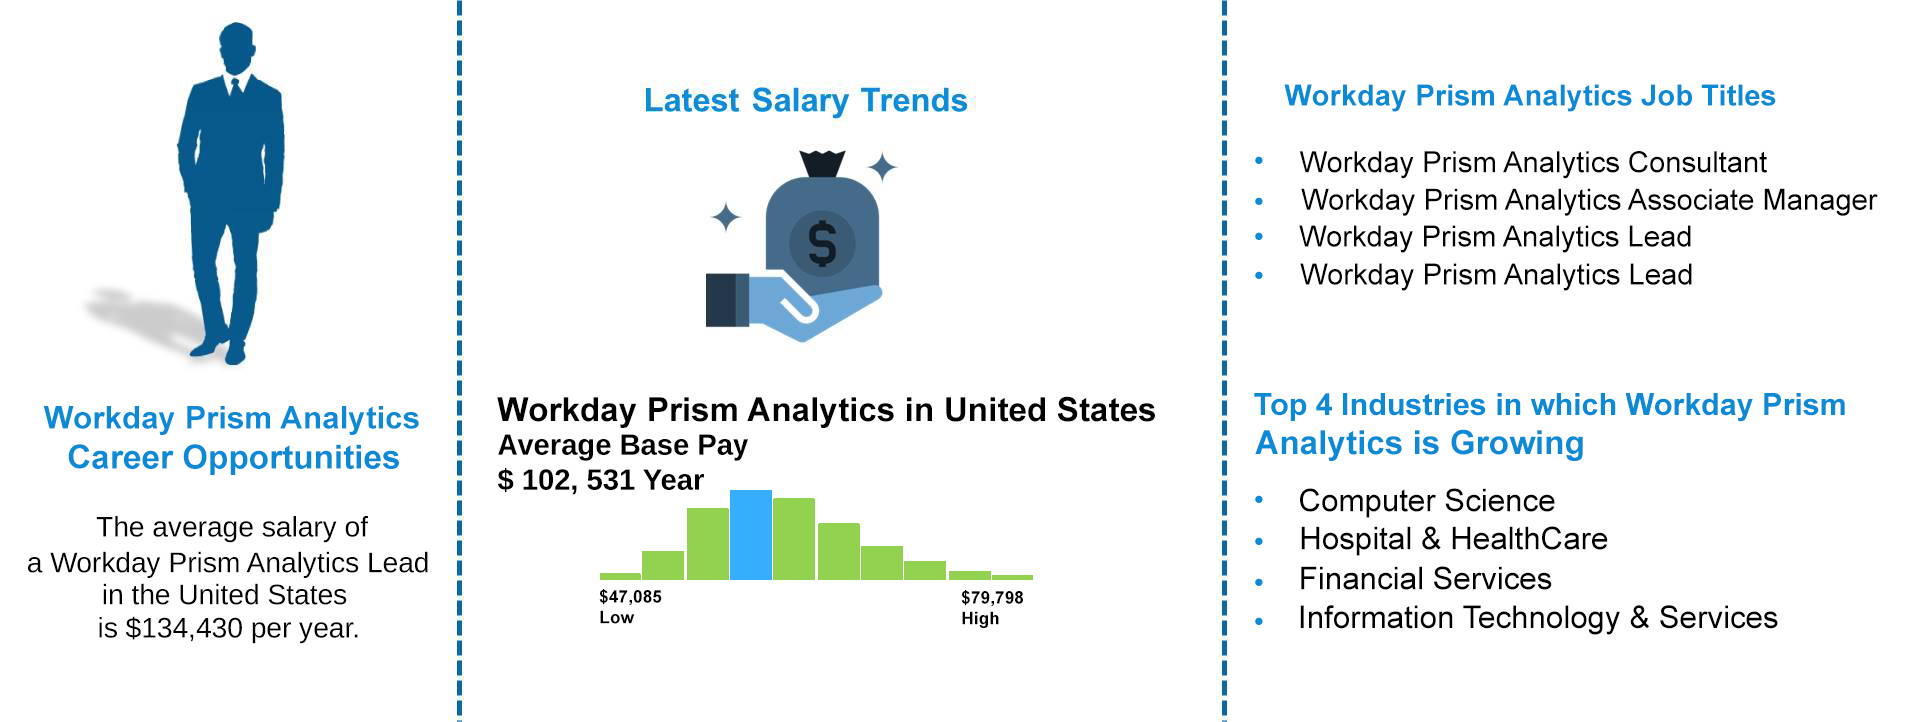 Workday Prism Analytics - Job Outlook